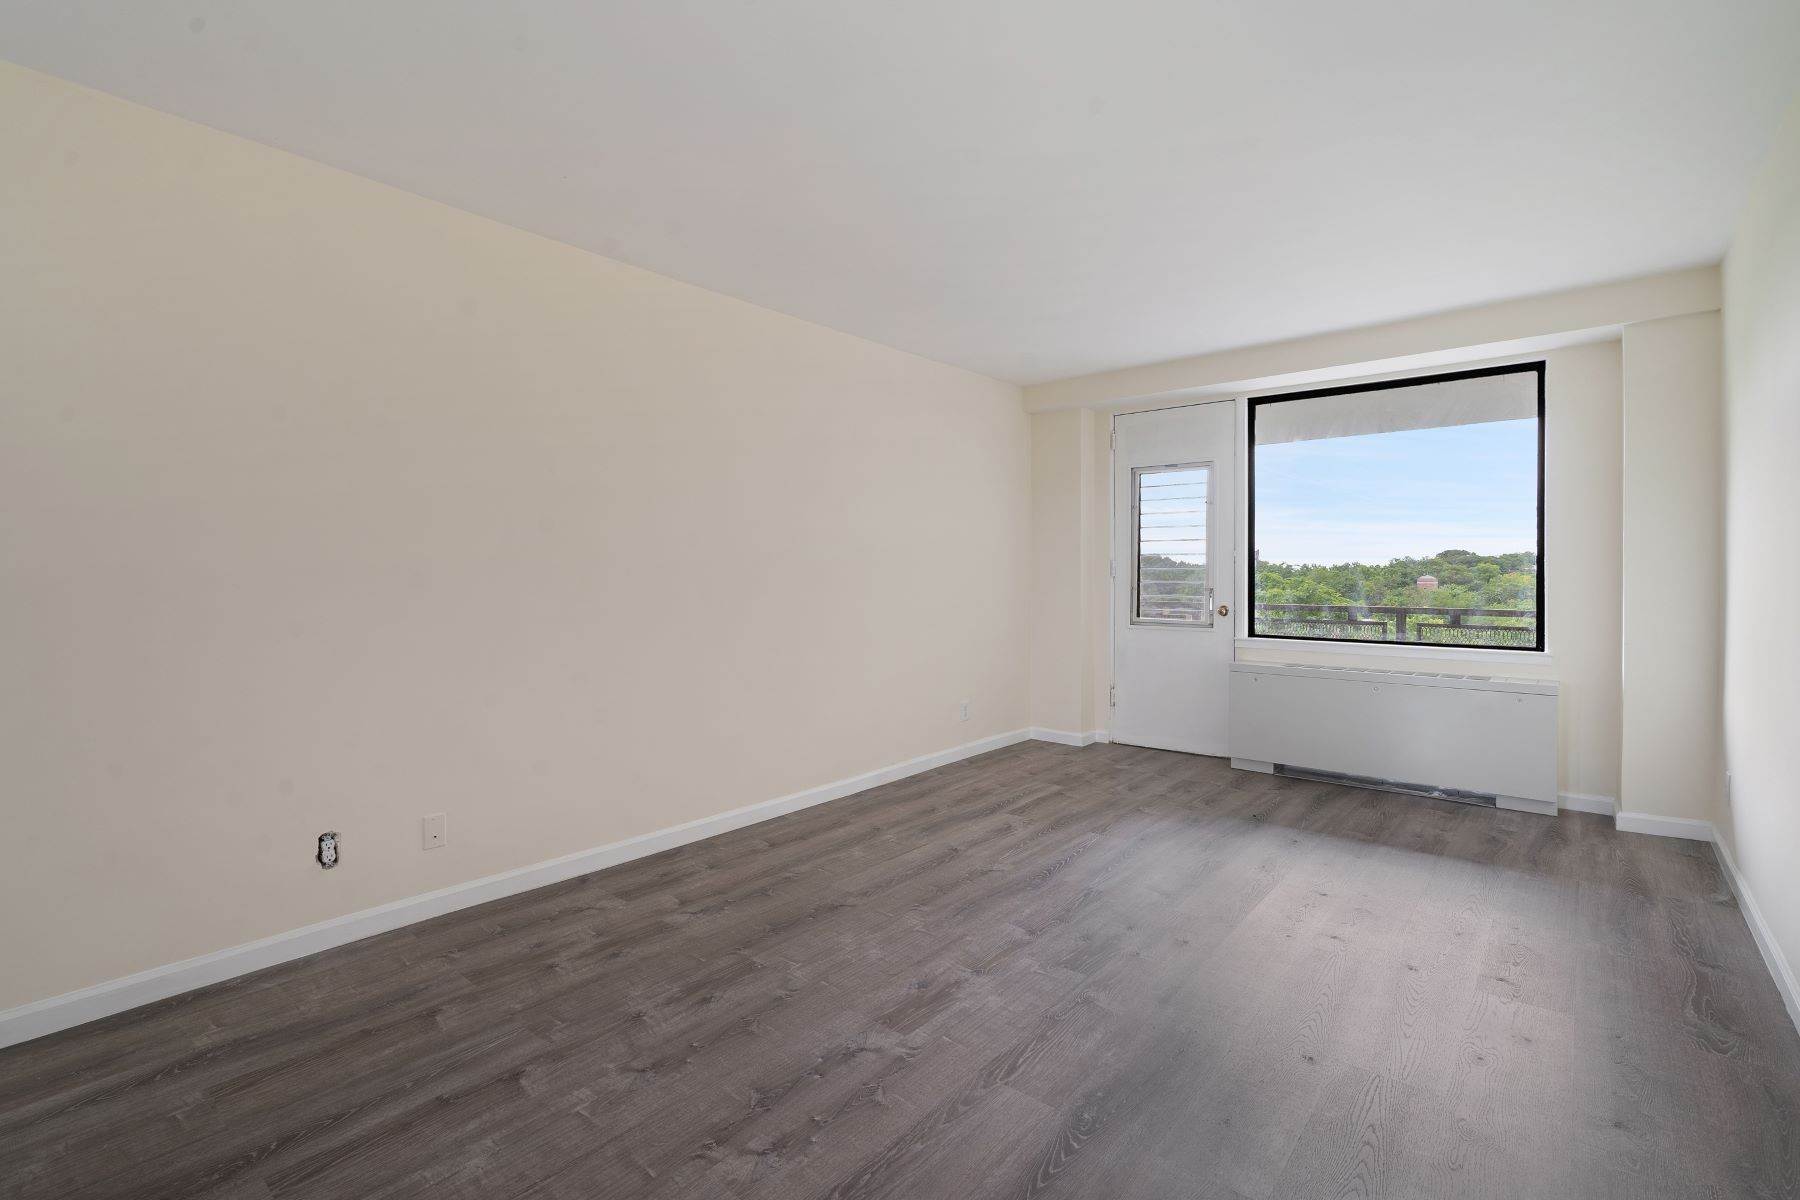 Co-op Properties for Sale at 4705 Henry Hudson Parkway, Apt 8G 4705 Henry Hudson Parkway, 8G Bronx, New York 10471 United States